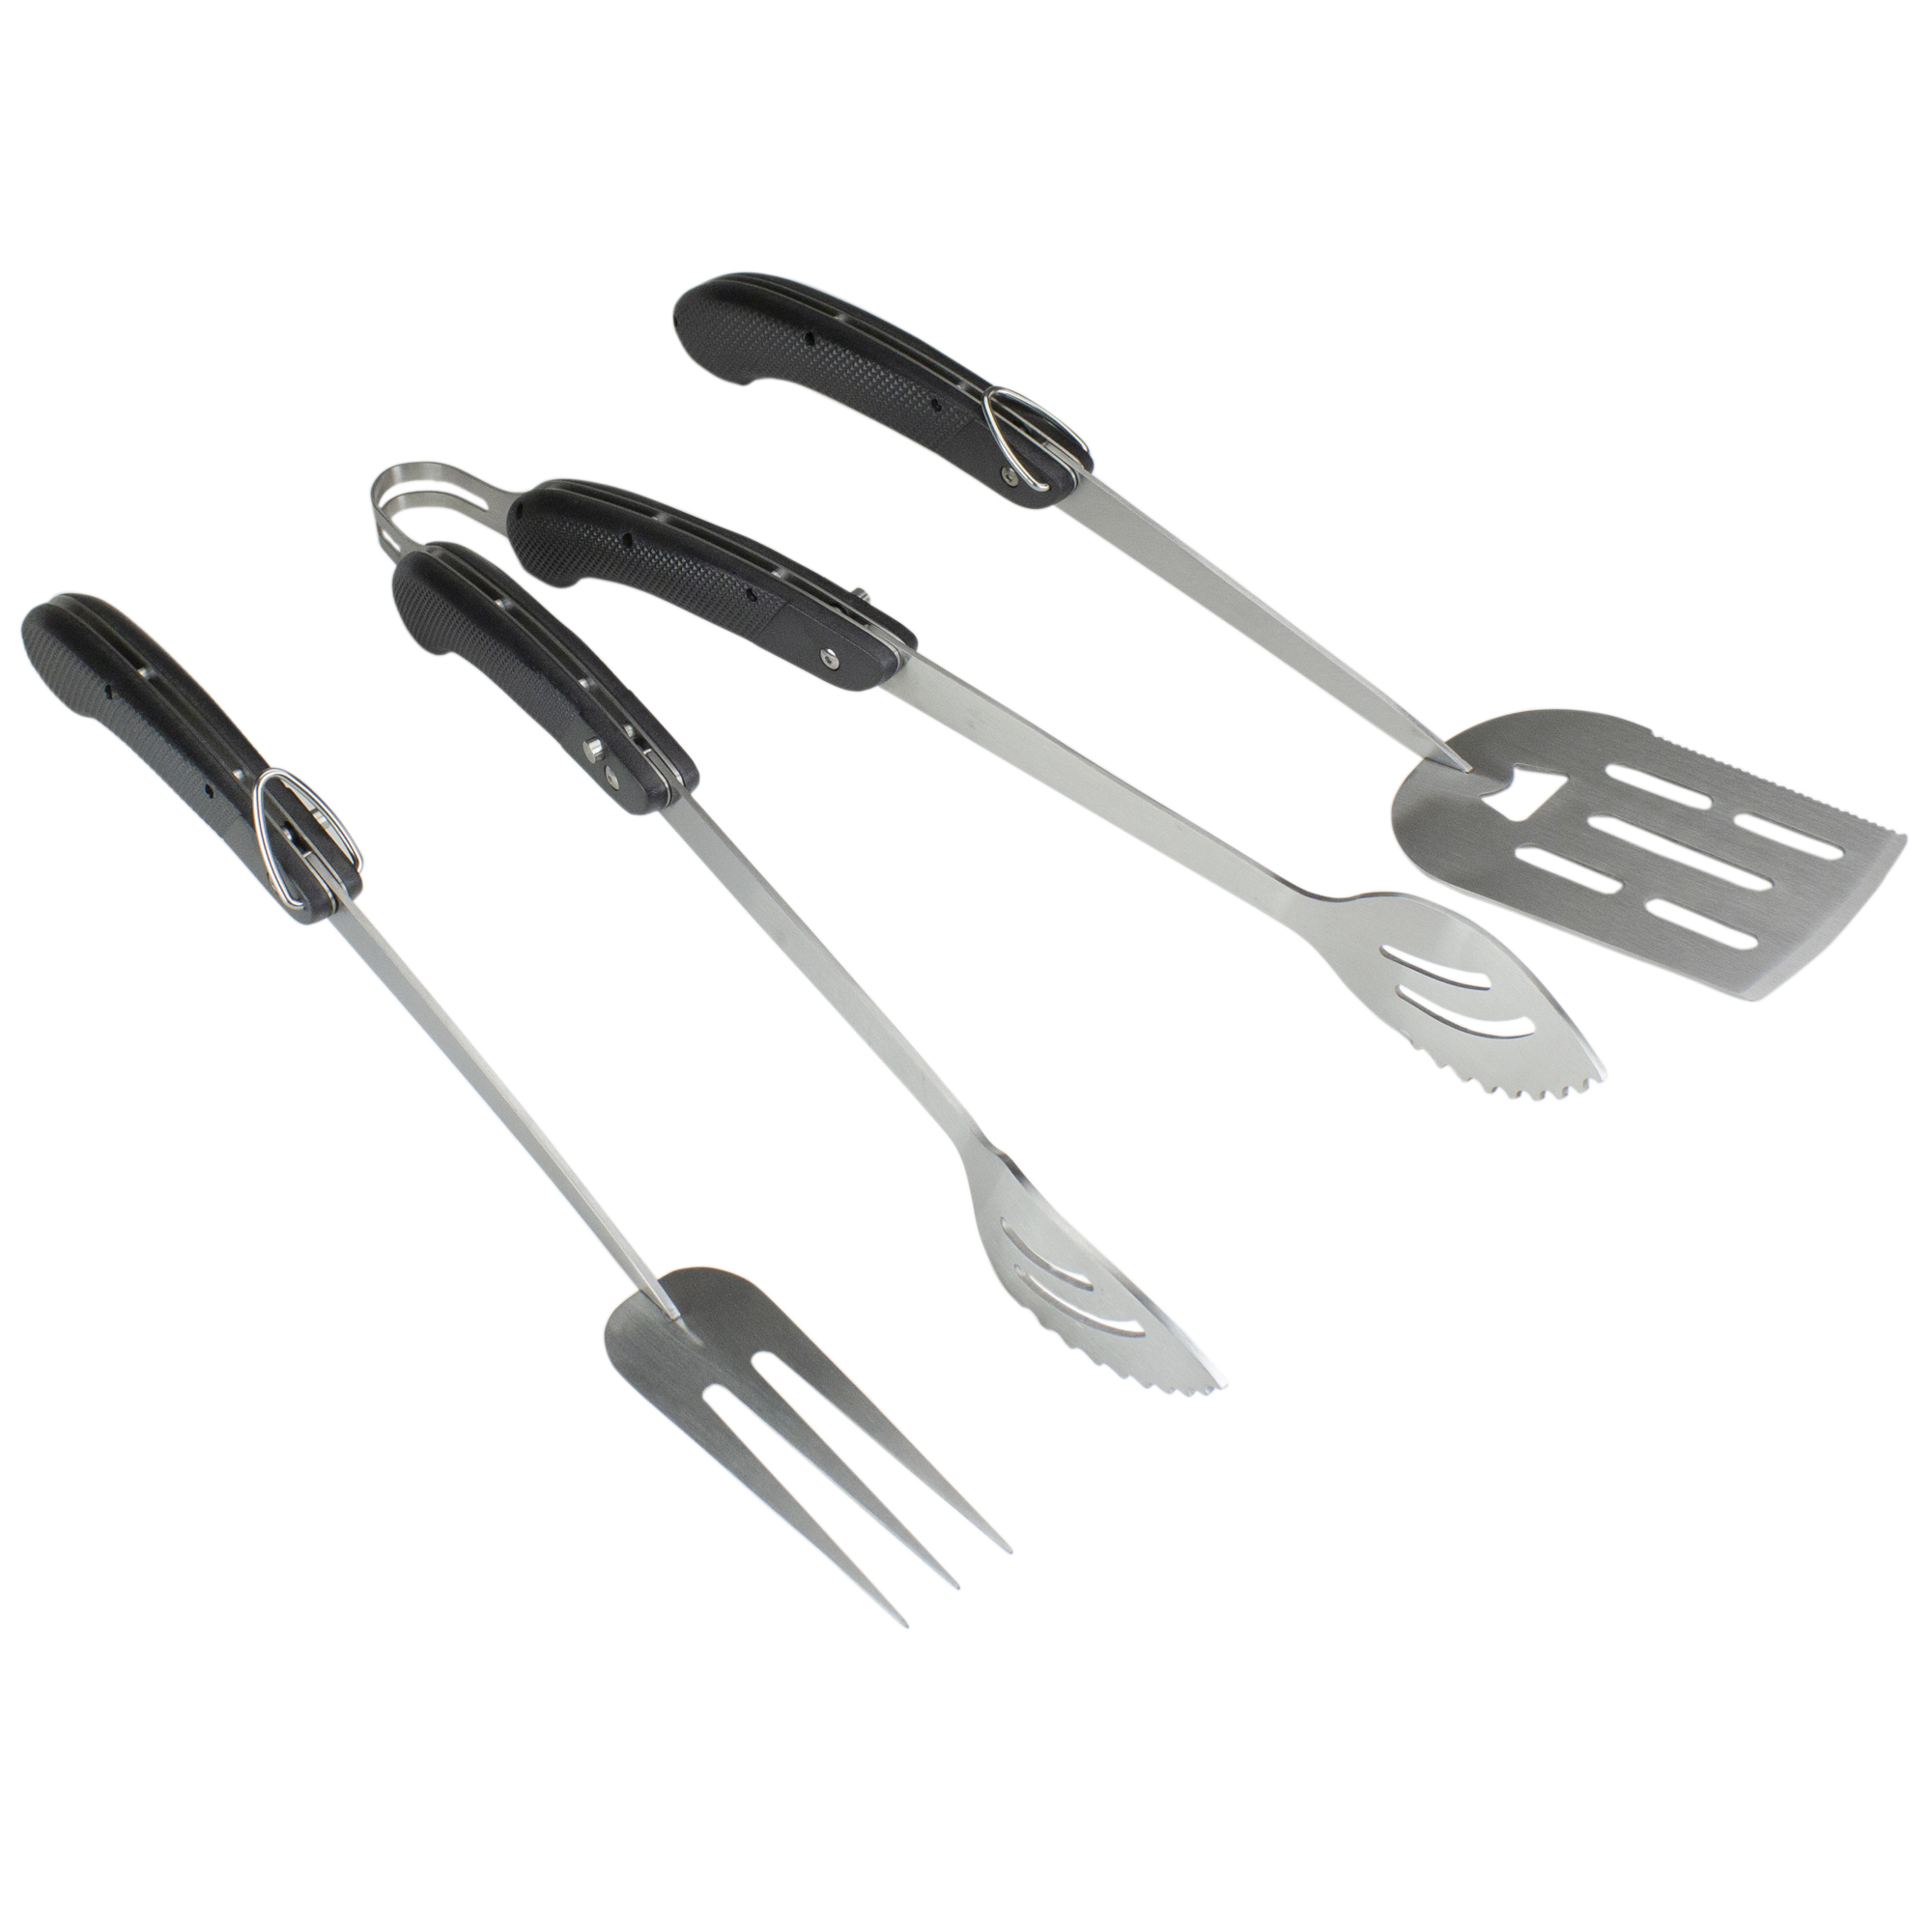 Avon Set of 3 Black and Silver Folding BBQ Tool Set 18" - image 3 of 3